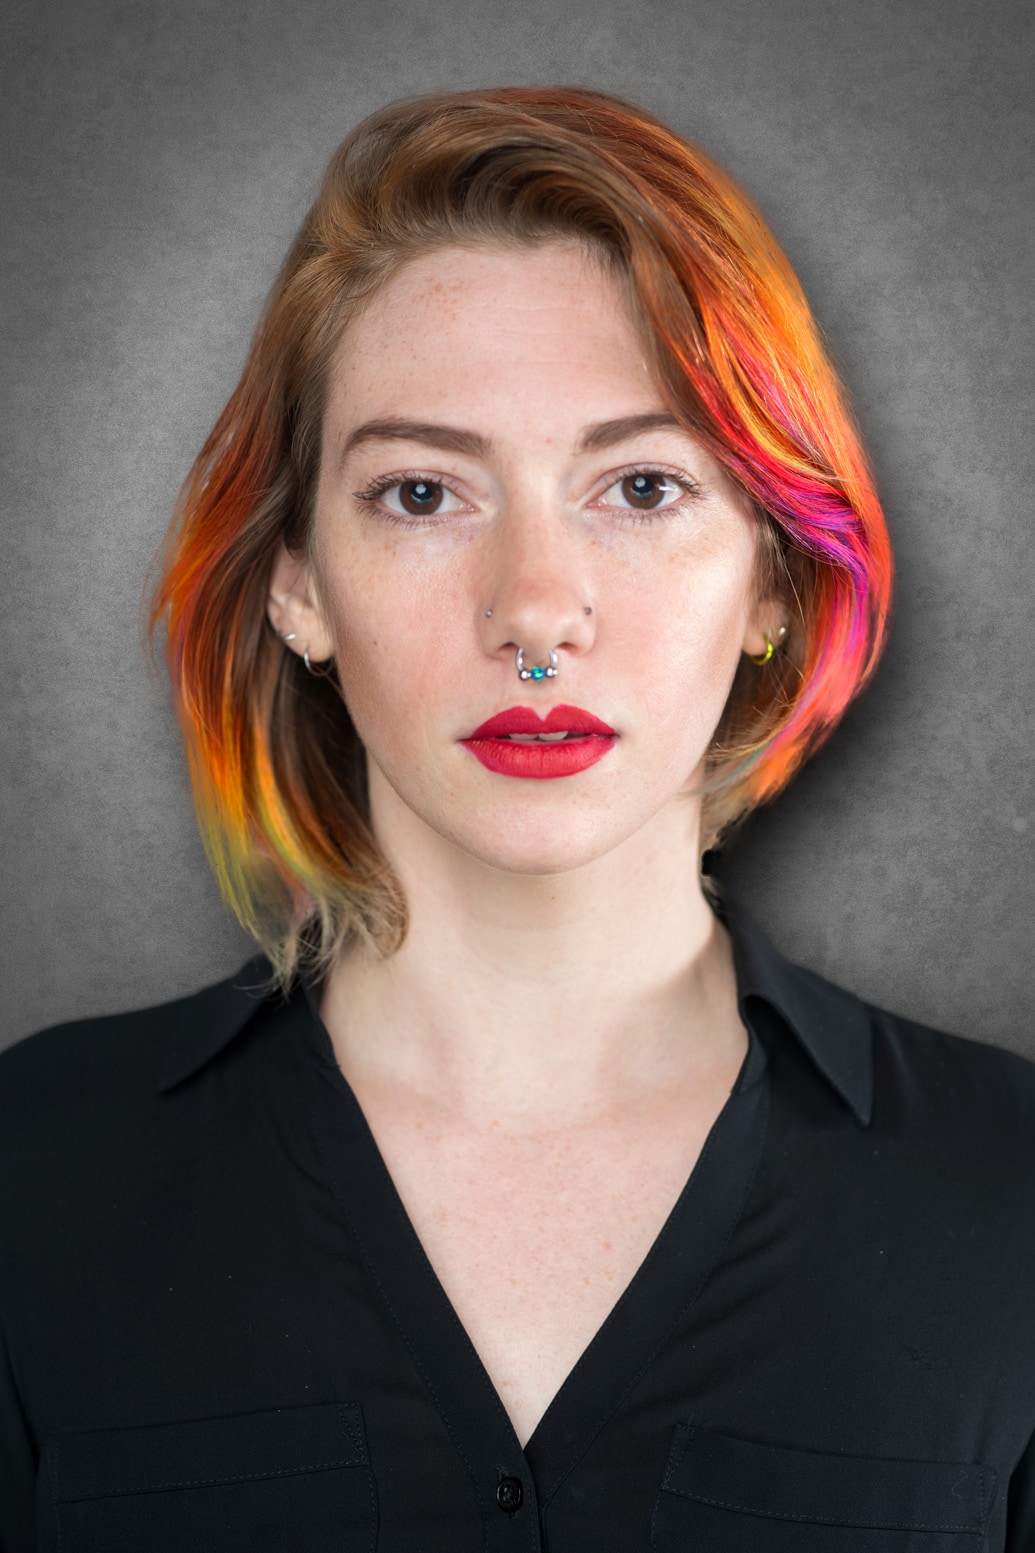 A woman with colorful hair and piercings.